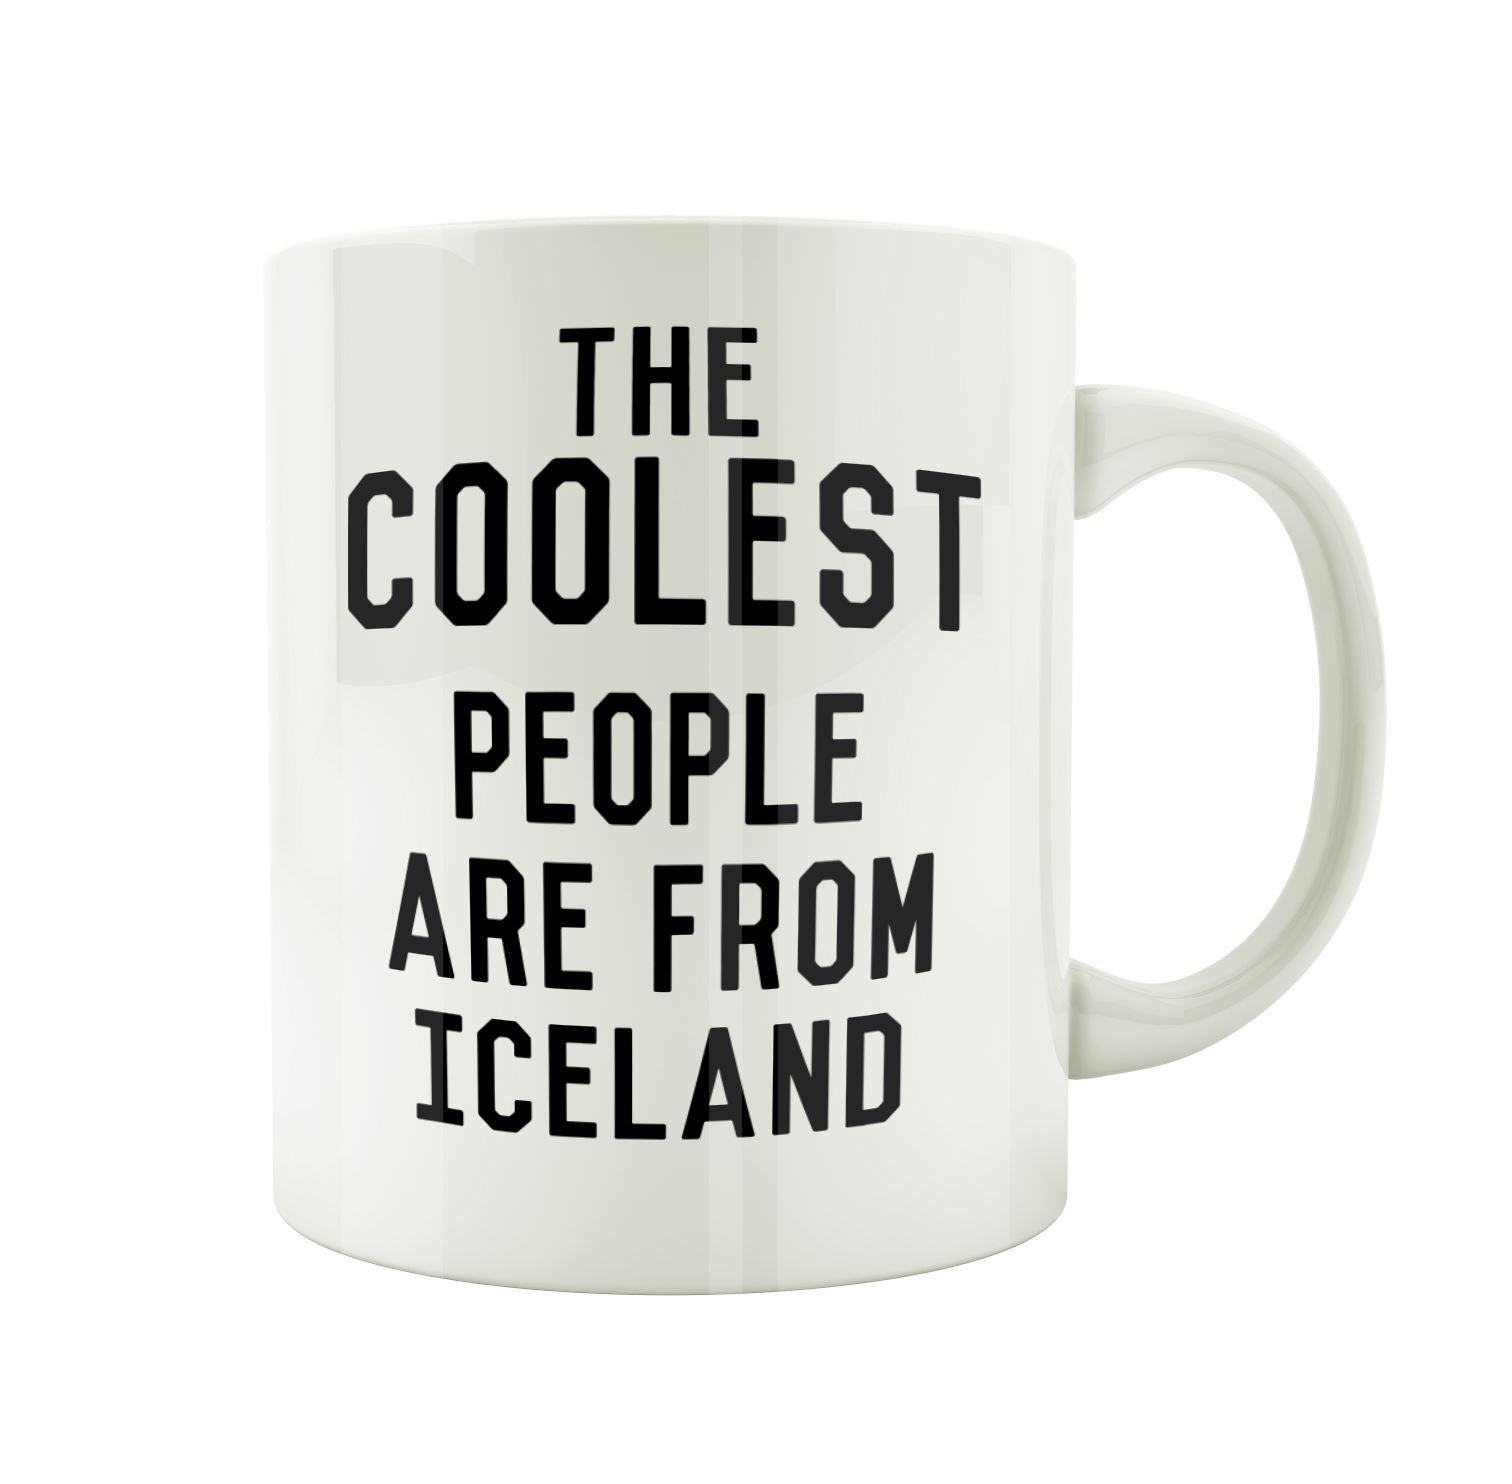 The coolest people are from iceland